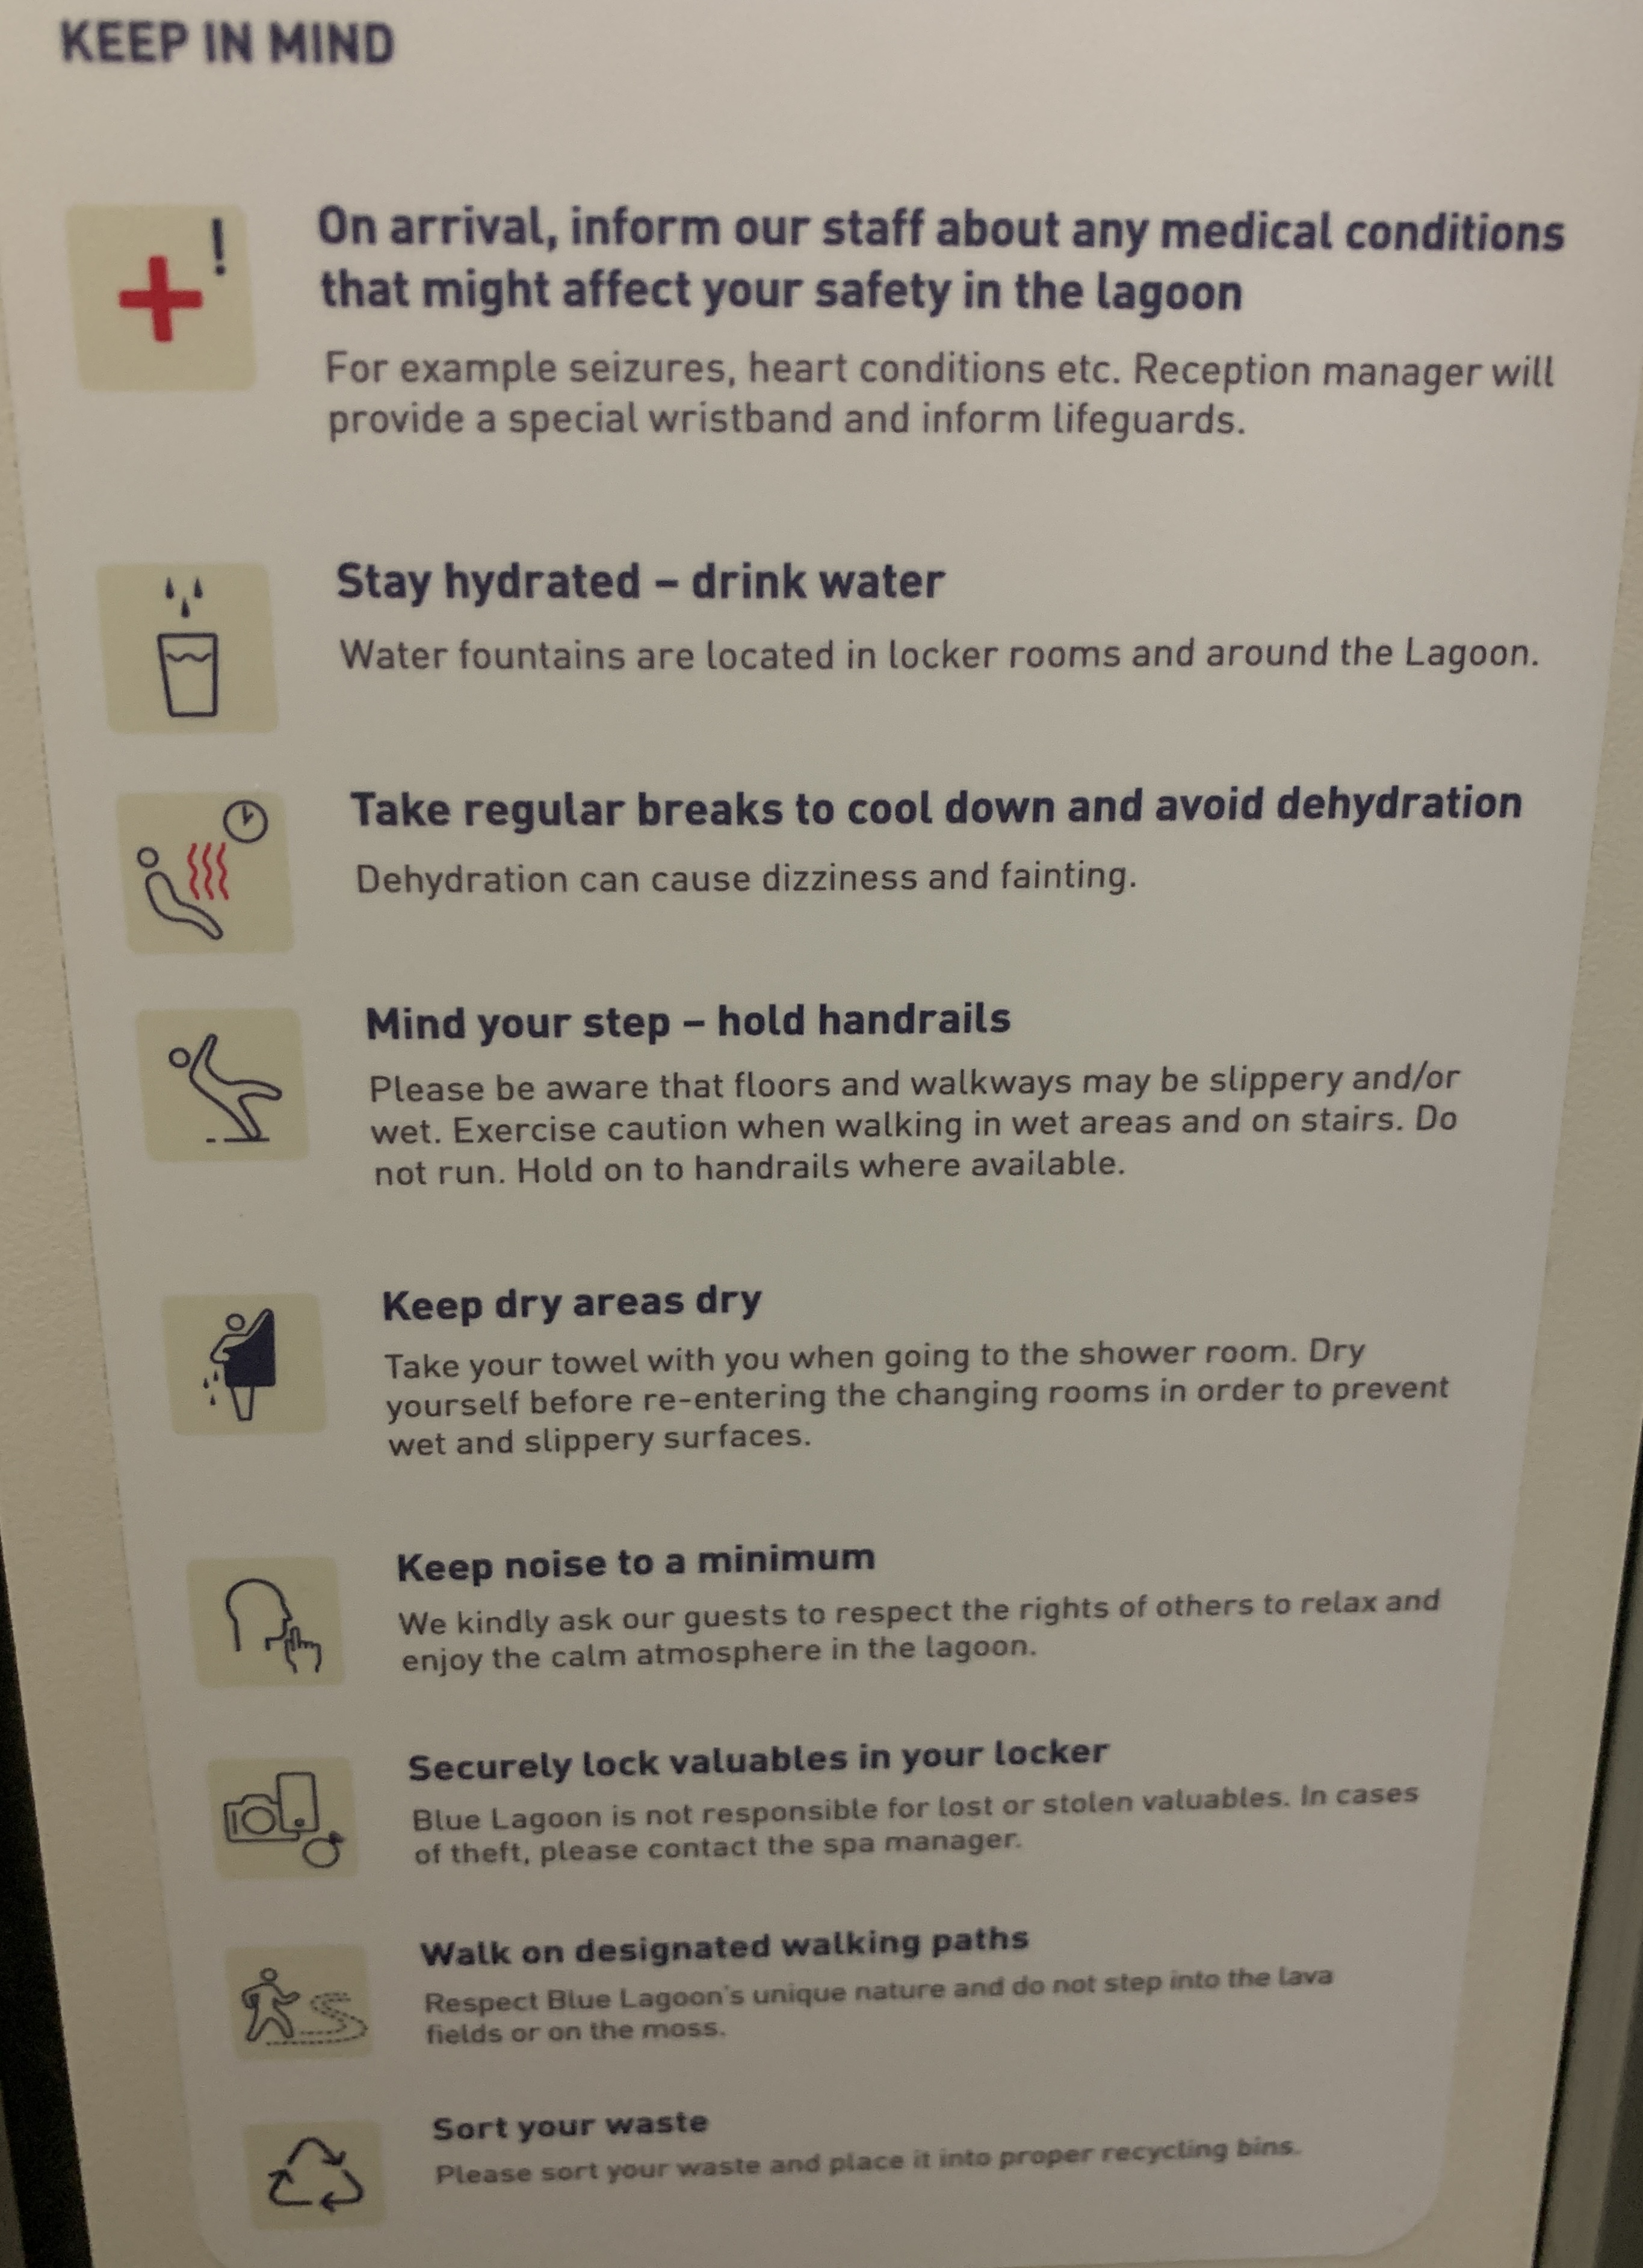 Safety tips on the inside of a locker at the Blue Lagoon